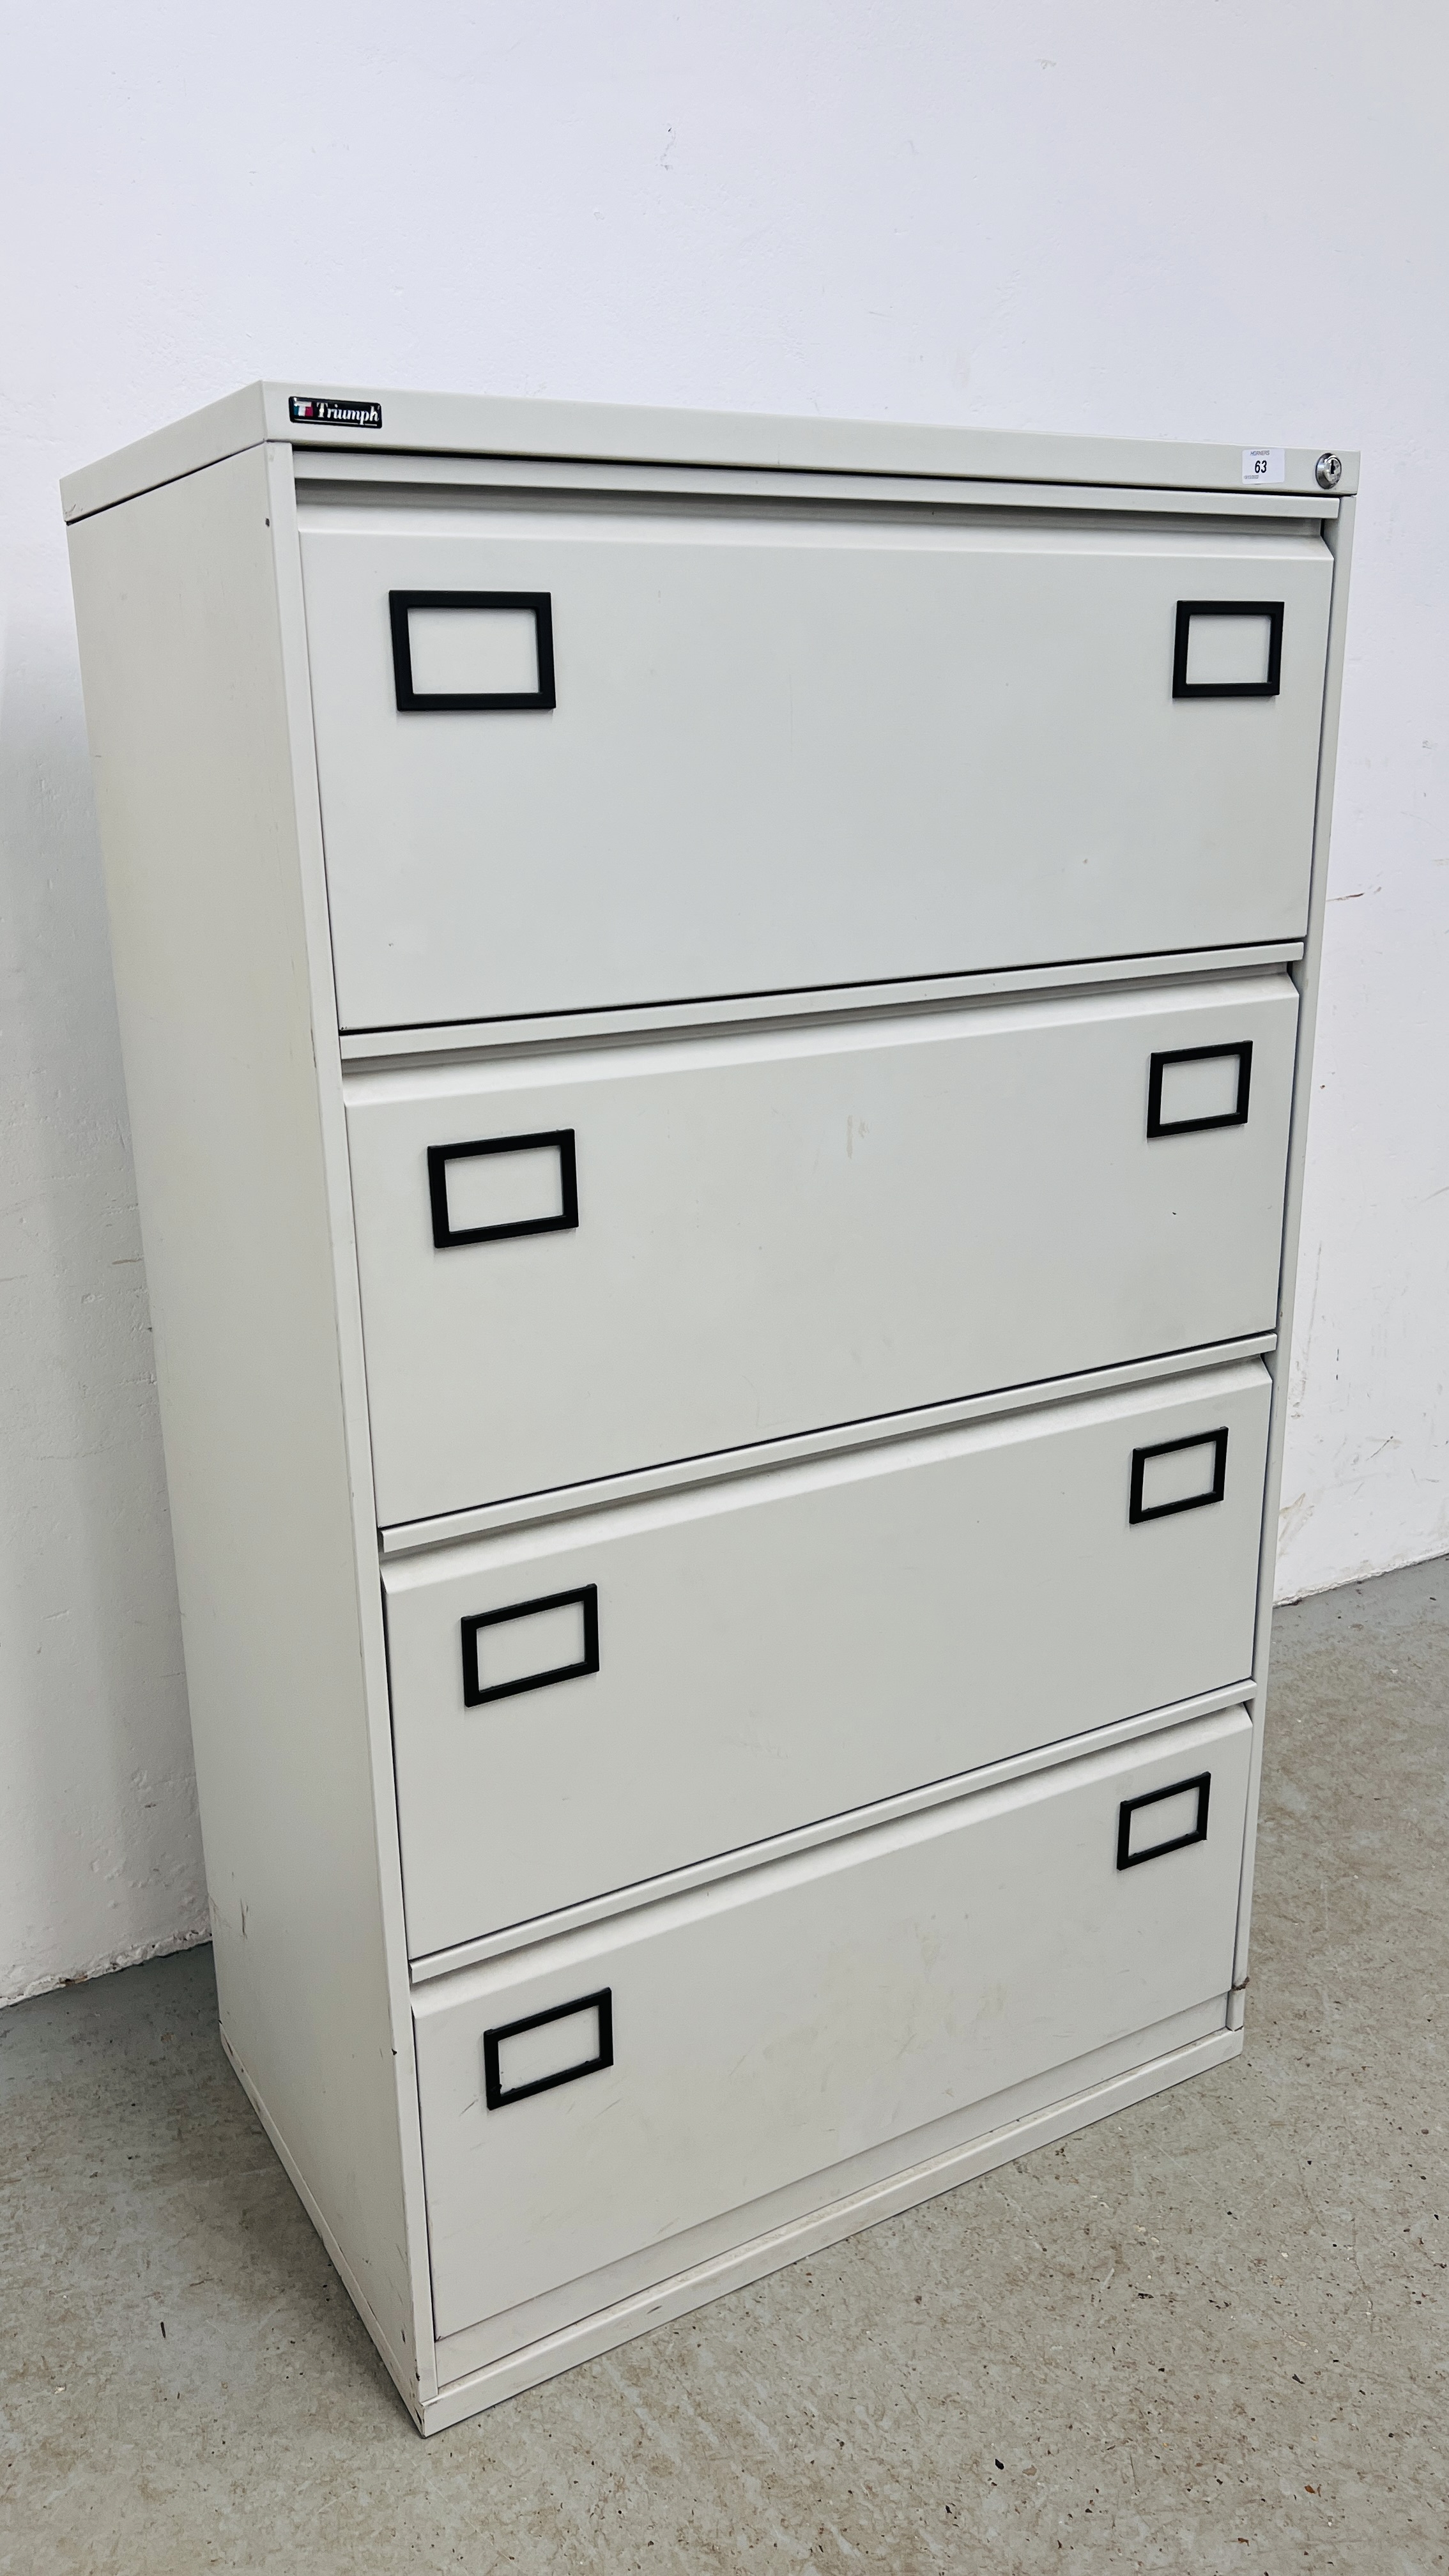 A GOOD QUALITY TRIUMPH METAL FOUR DRAWER FILING CABINET - Image 3 of 7